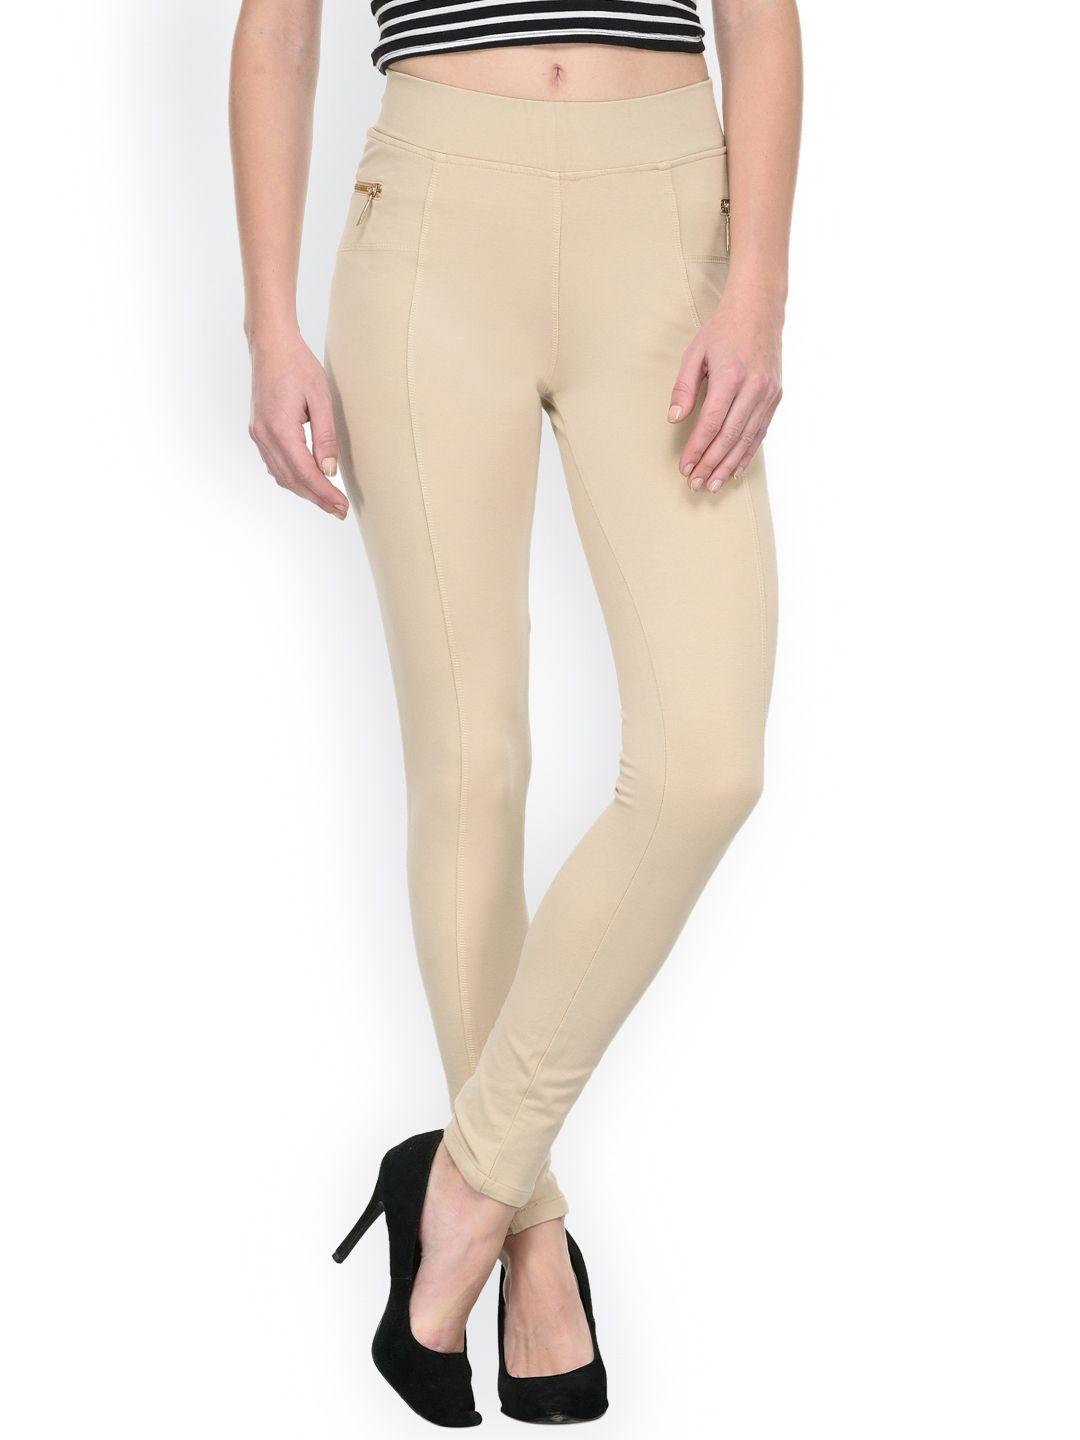 westwood-cream-coloured-skinny-fit-jeggings